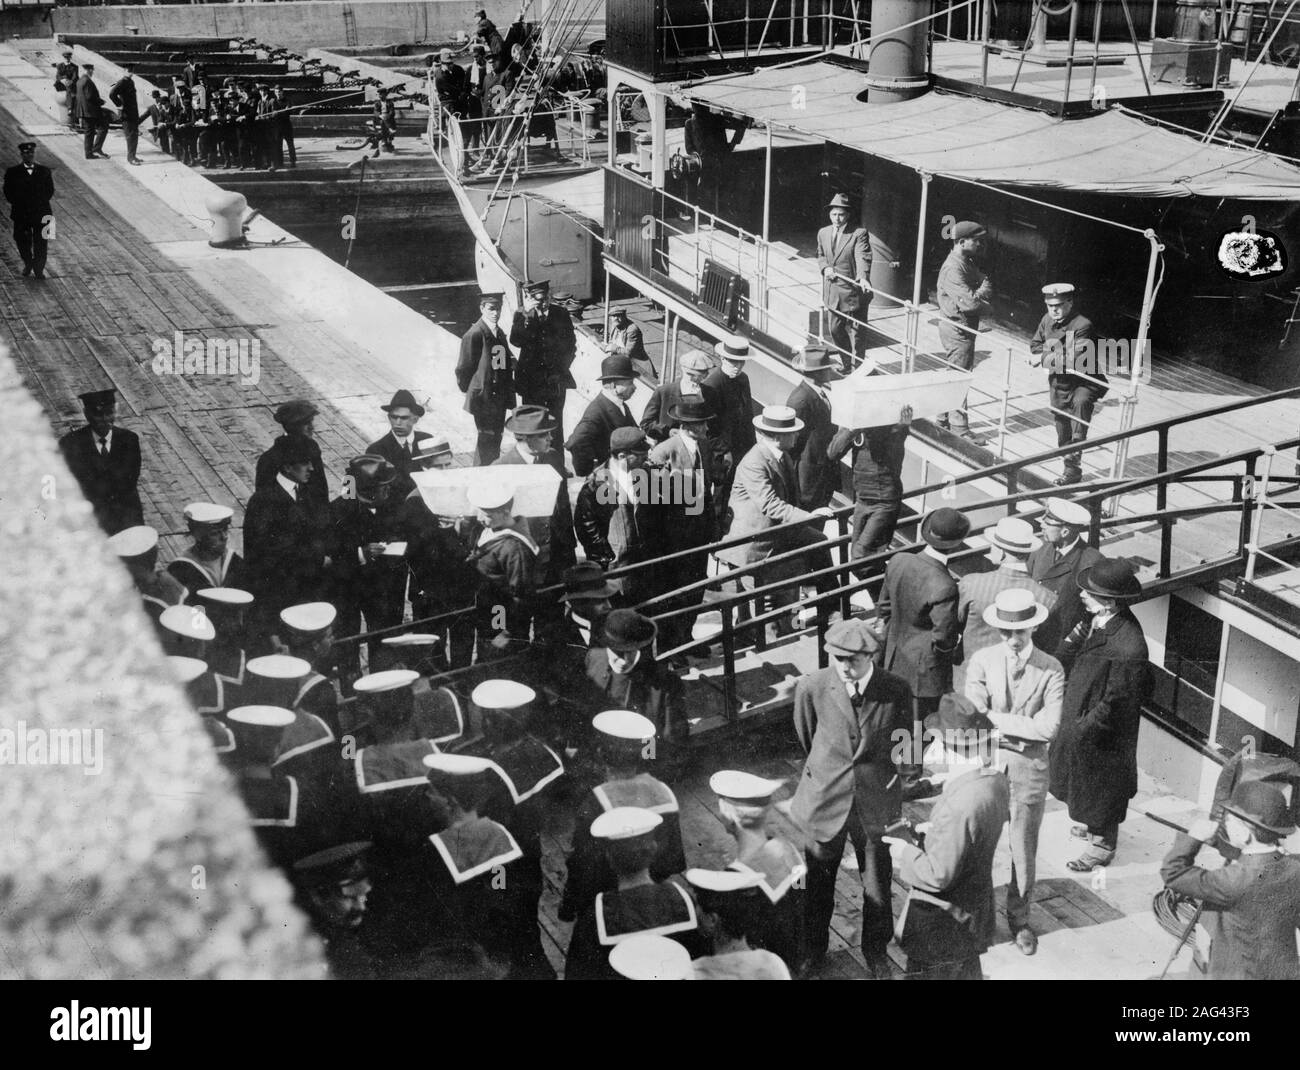 Sailors taking children in coffins from the Lady Grey at Quebec following the sinking of the RMS Empress of Ireland in May 1914. Stock Photo